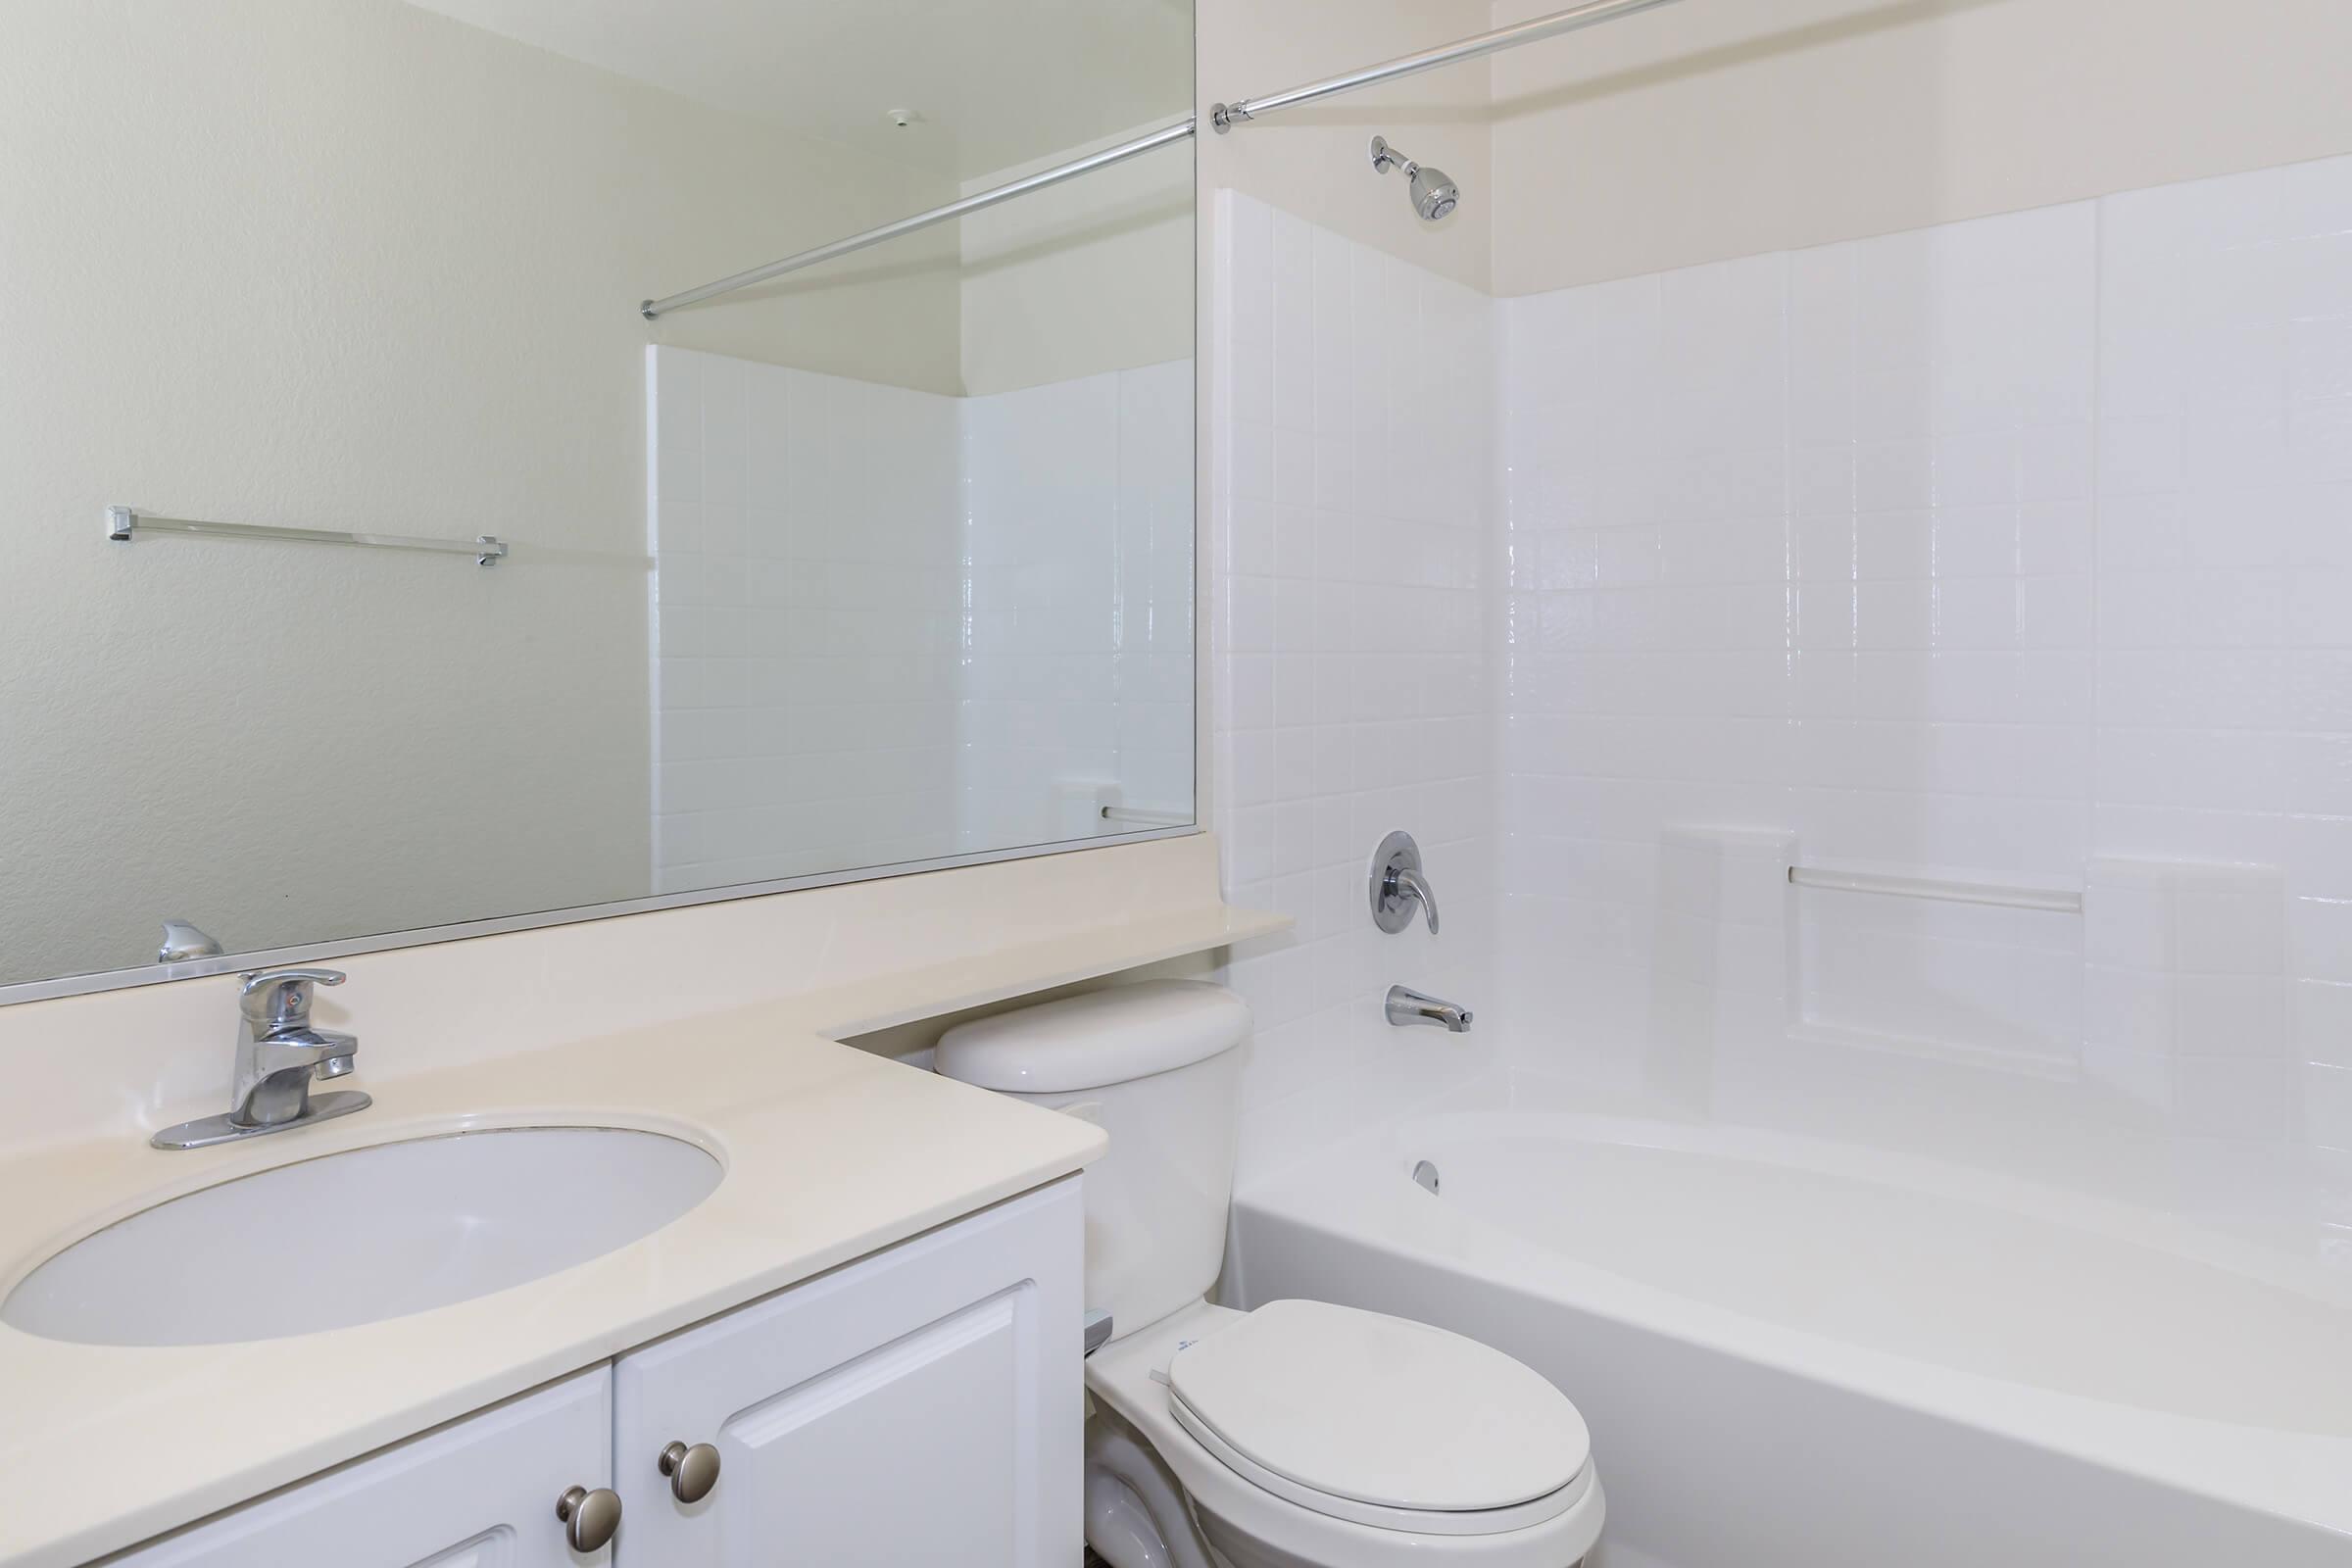 Laurel Glen Apartment Homes has all-in-one shower and bath